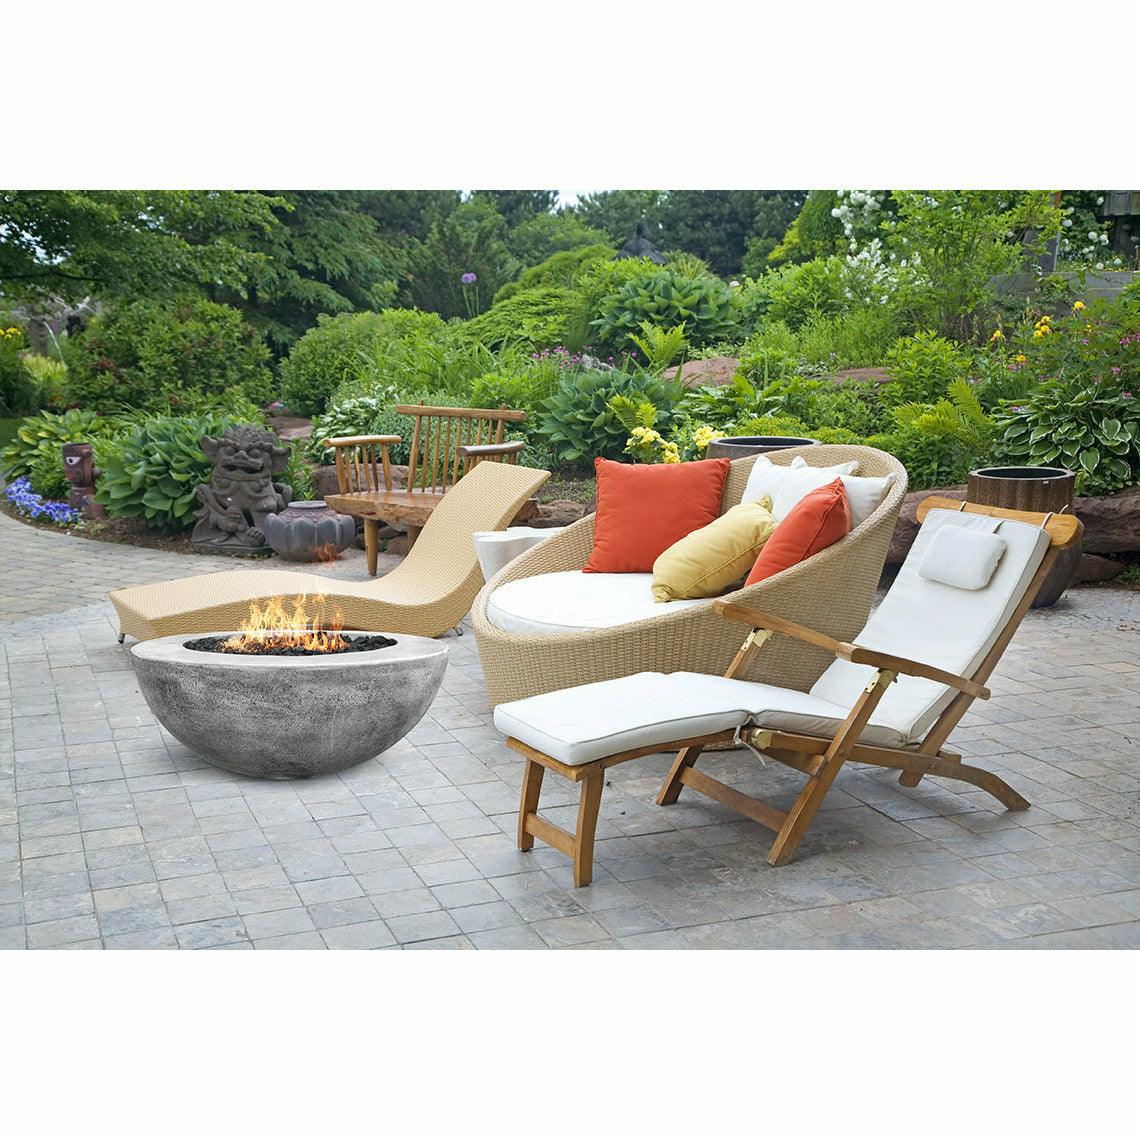 Prism Hardscapes - Moderno Series 6 Round Concrete Fire Bowl - Fire Pit Stock